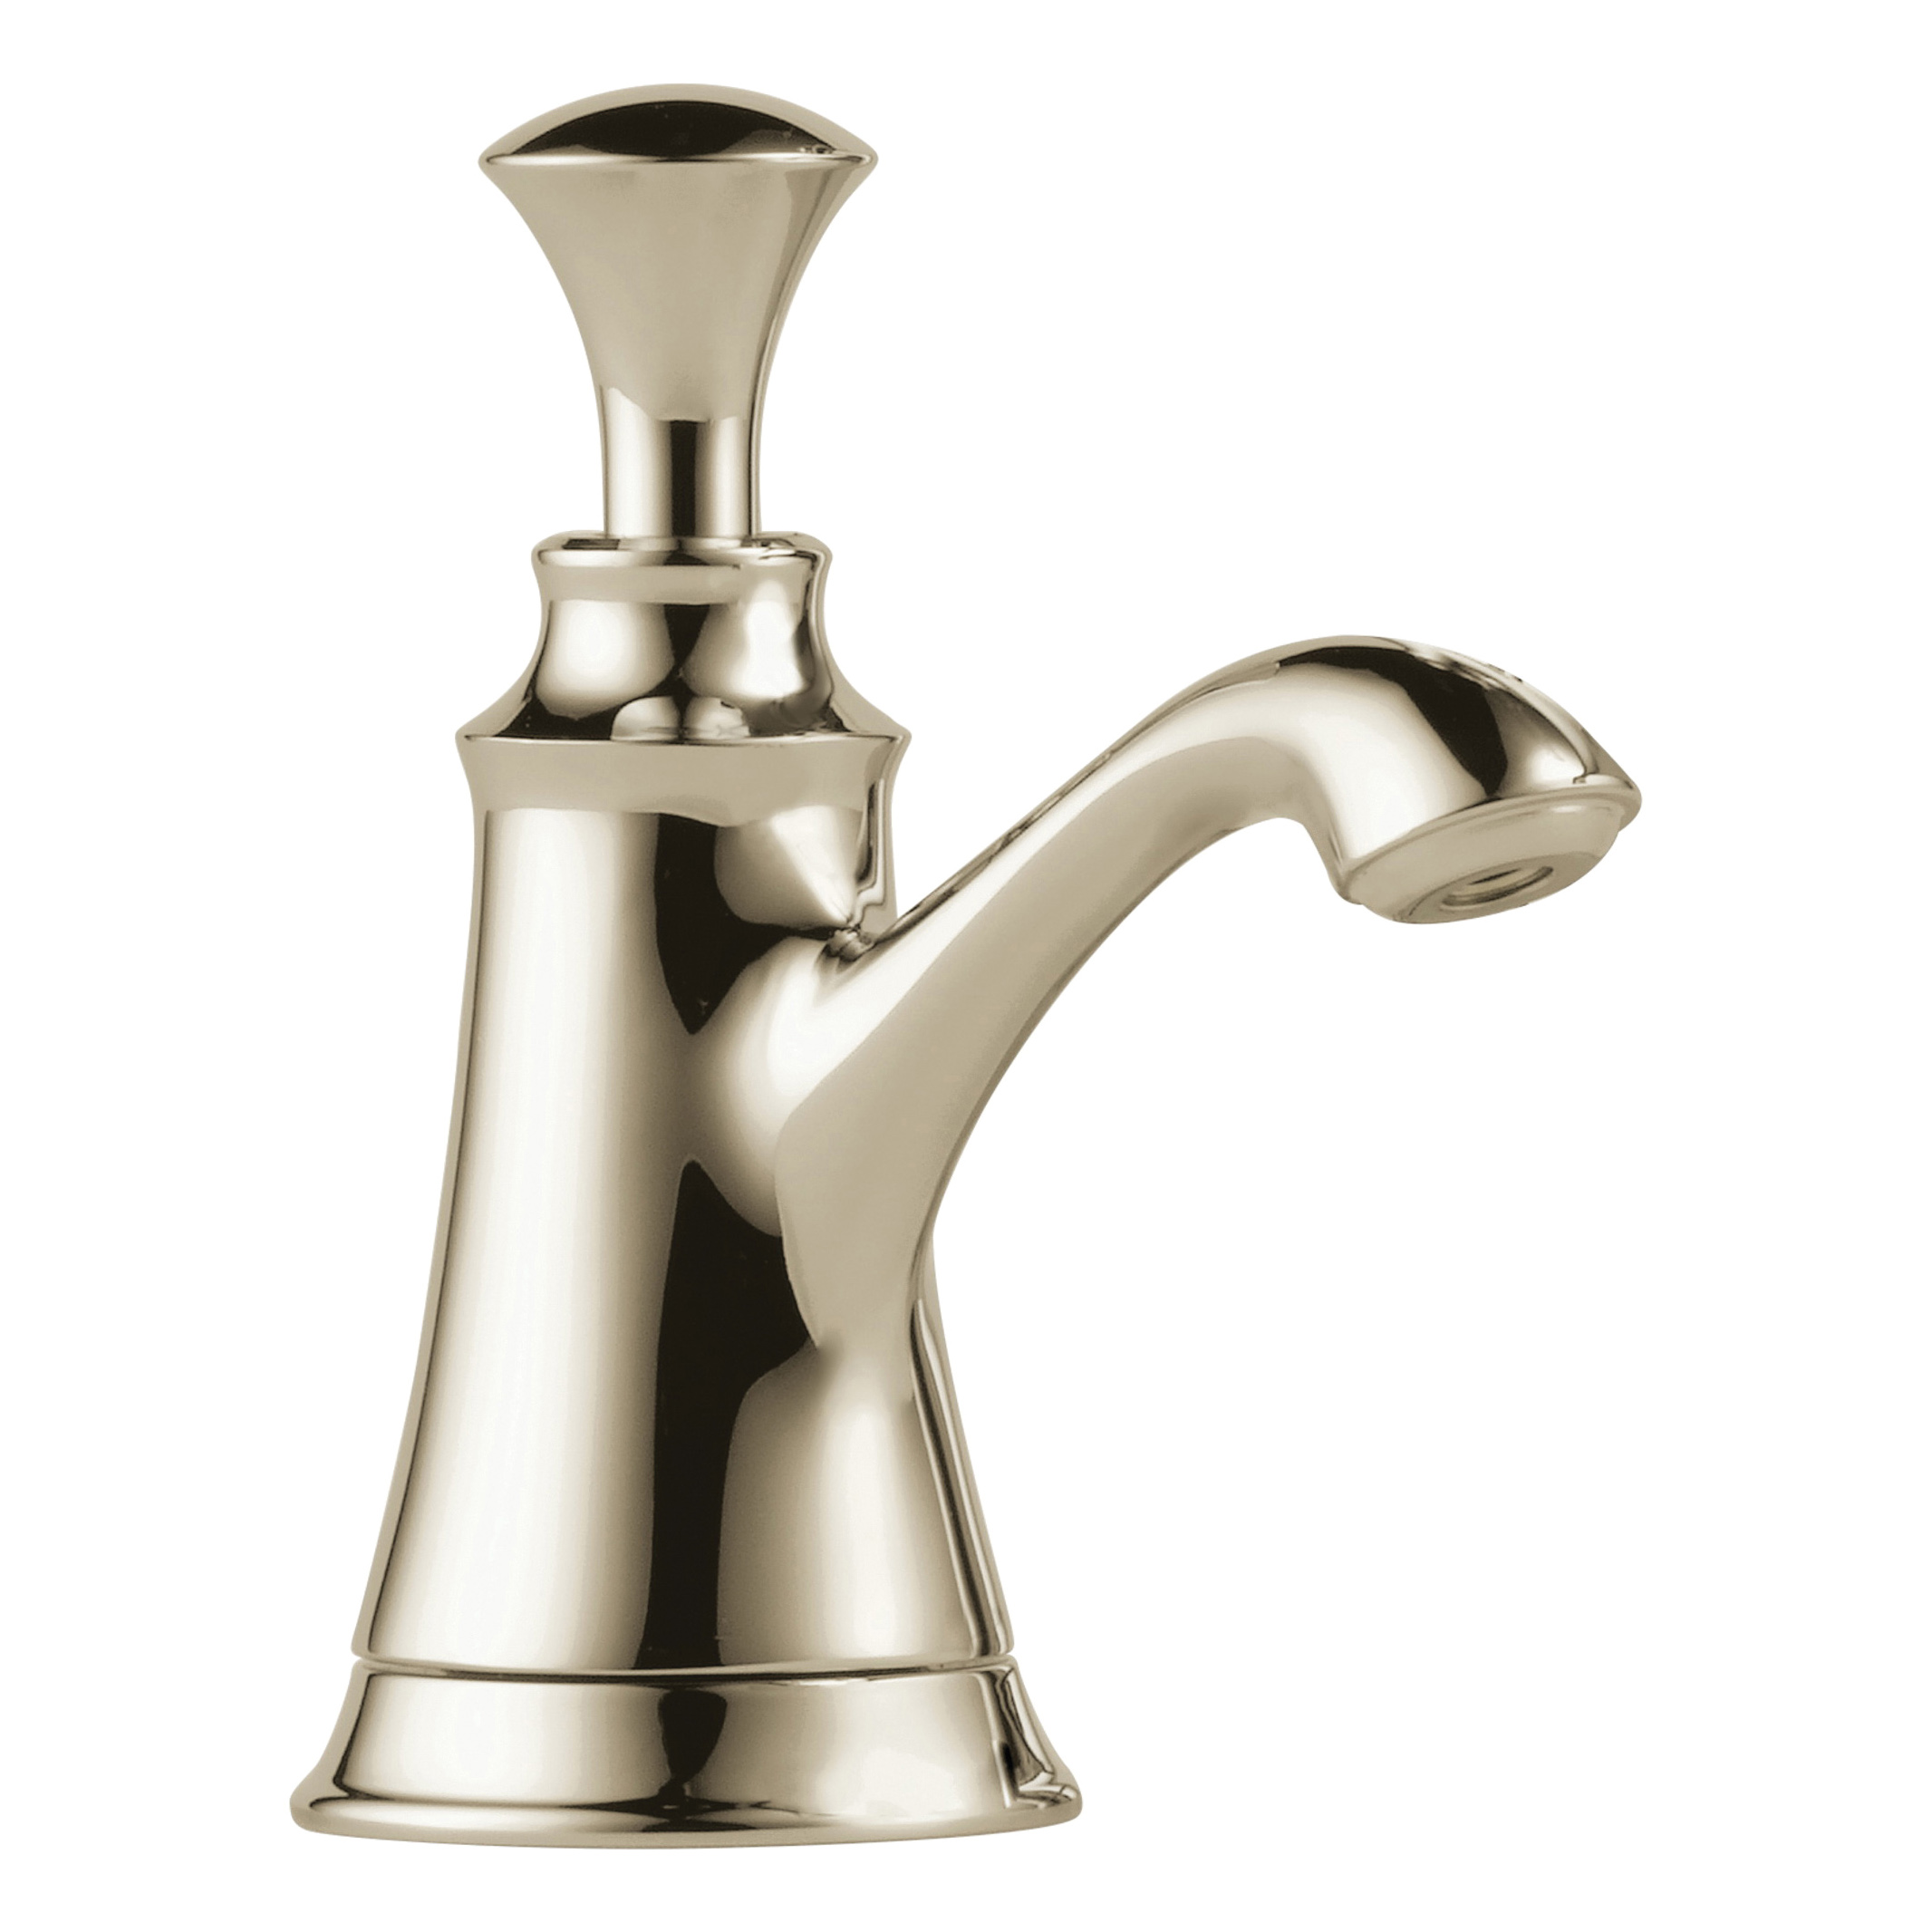 Soap/Lotion Dispenser in Polished Nickel